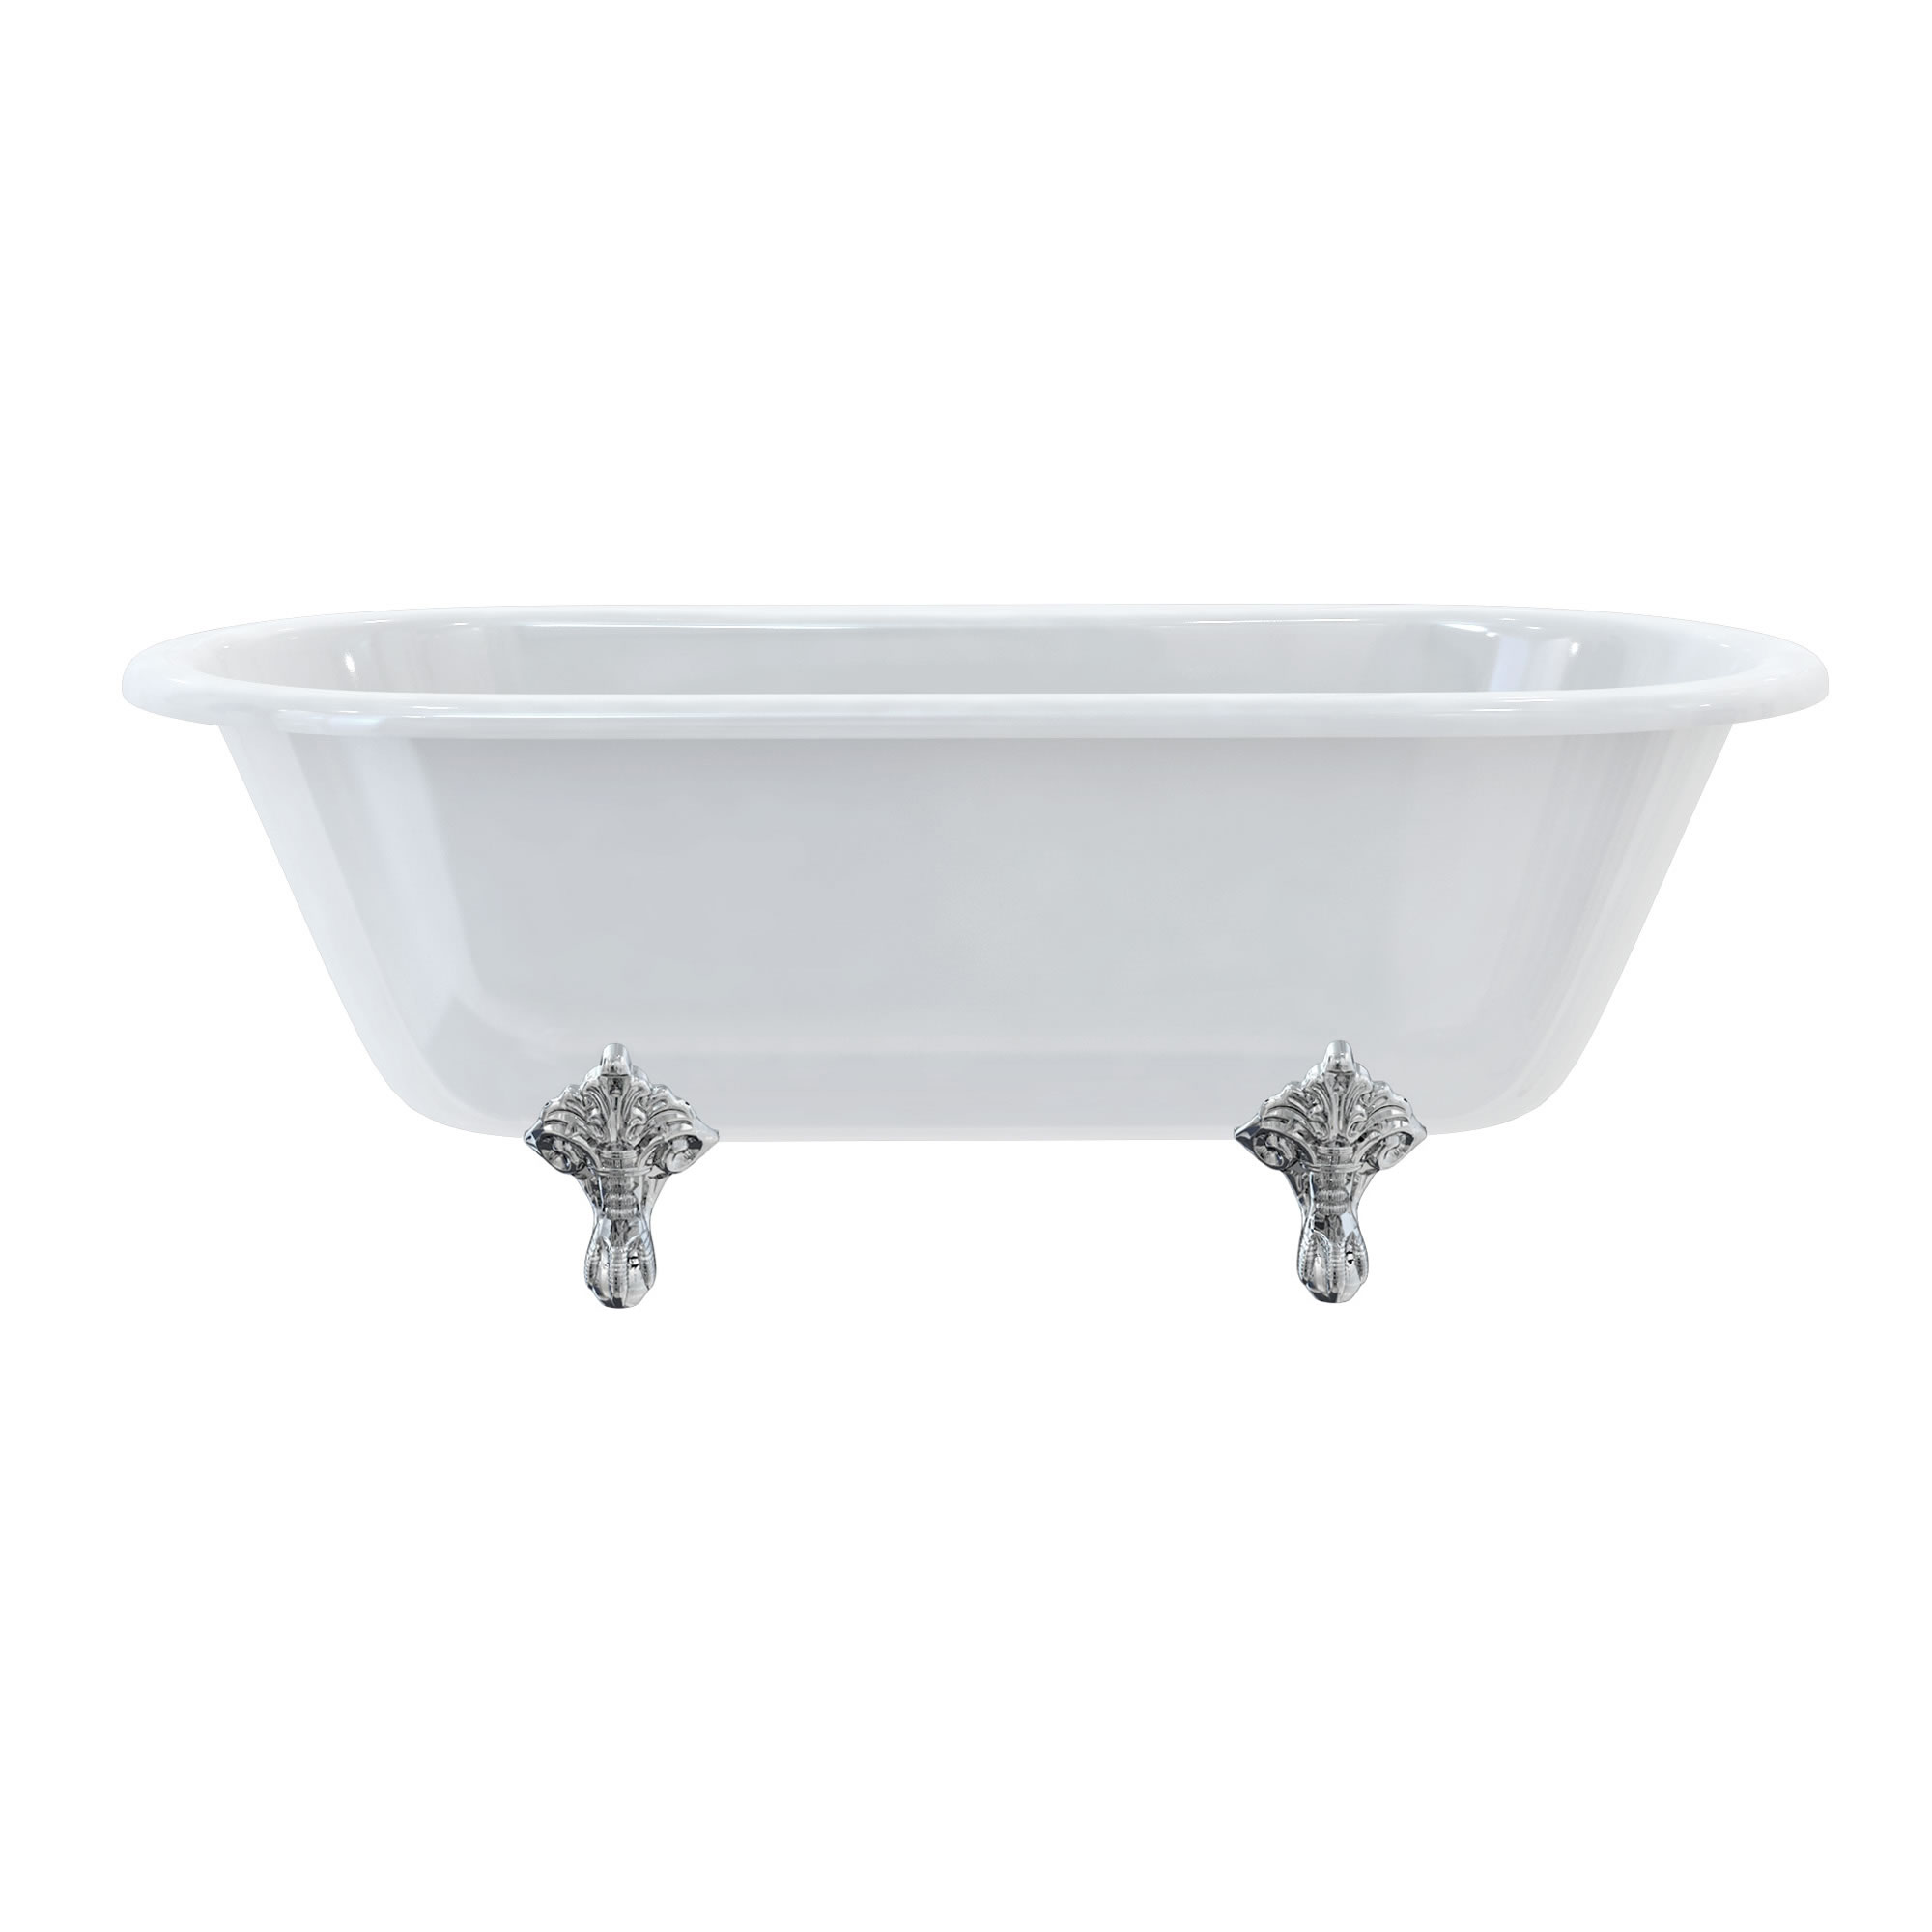 Windsor double ended 170cm bath with standard legs